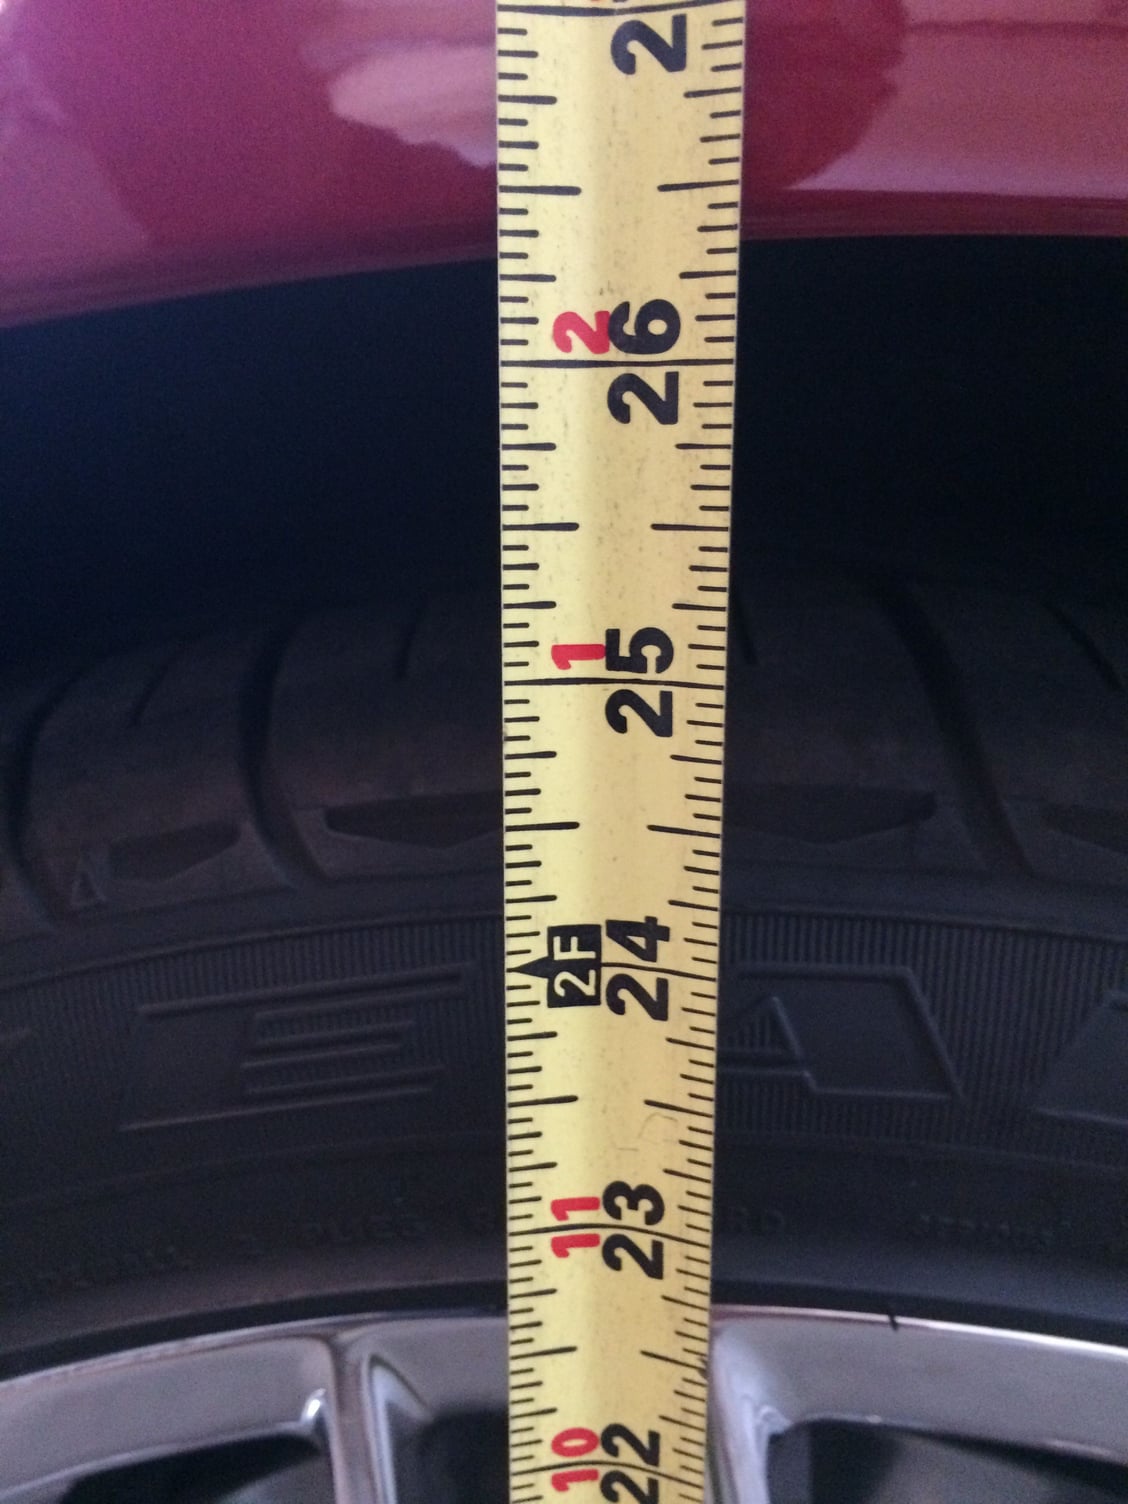 Polling for Data - Please Share Your Ride Height Measurements ...